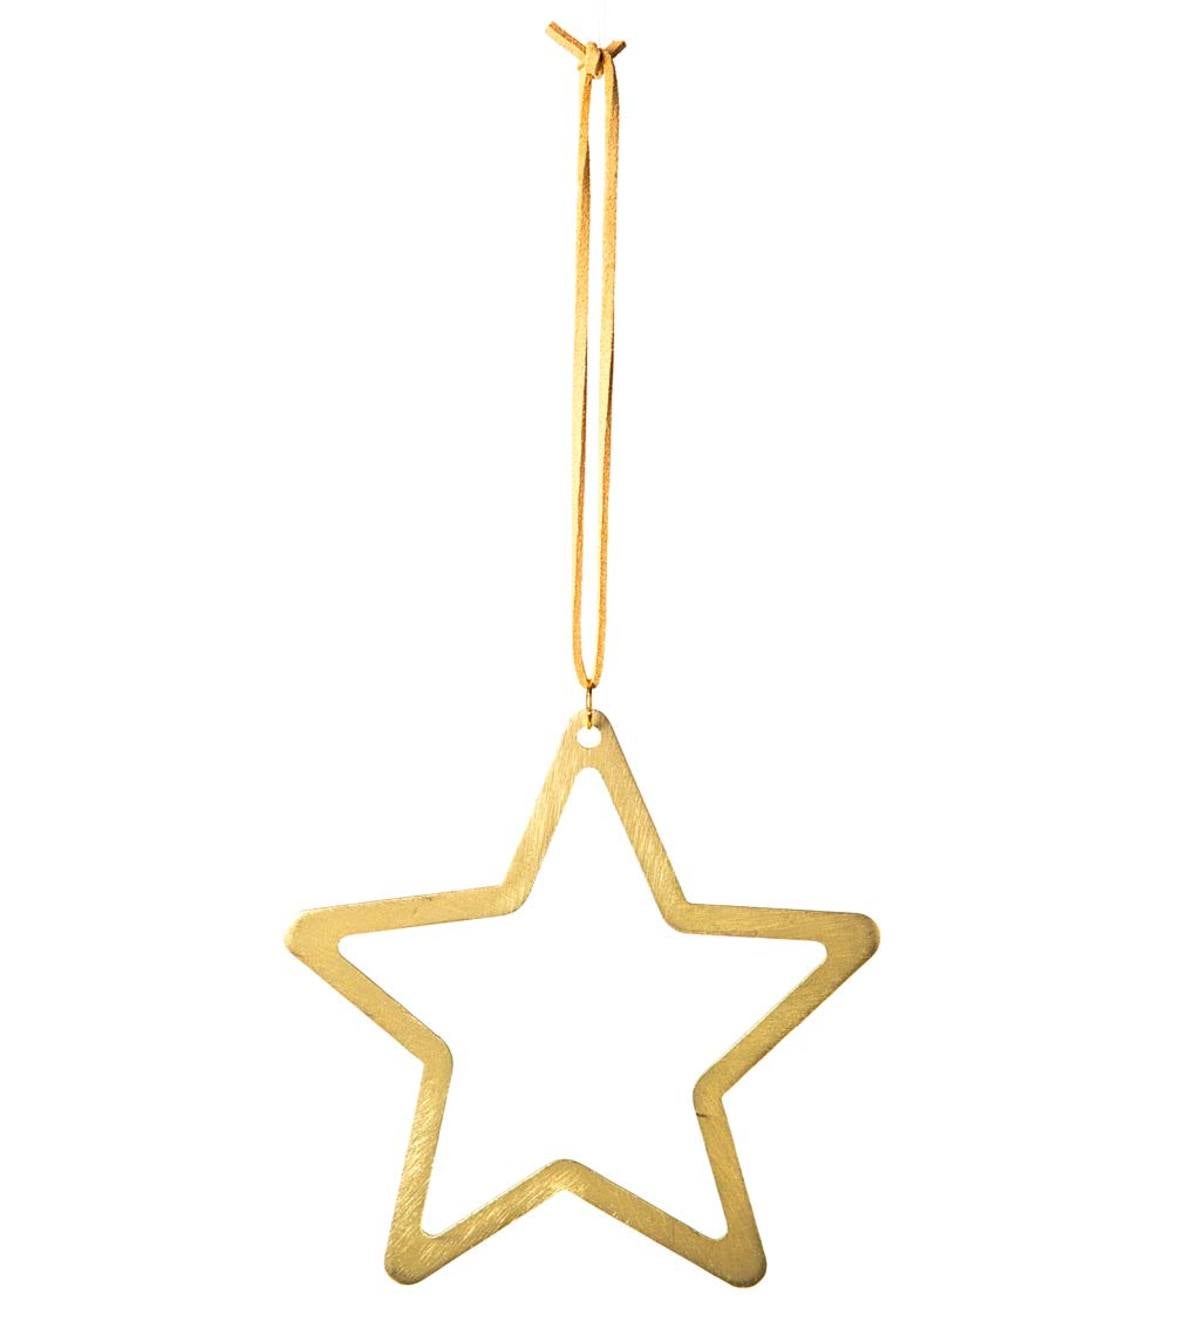 Gold Metal Star and Moon Silhouette Ornaments - Star